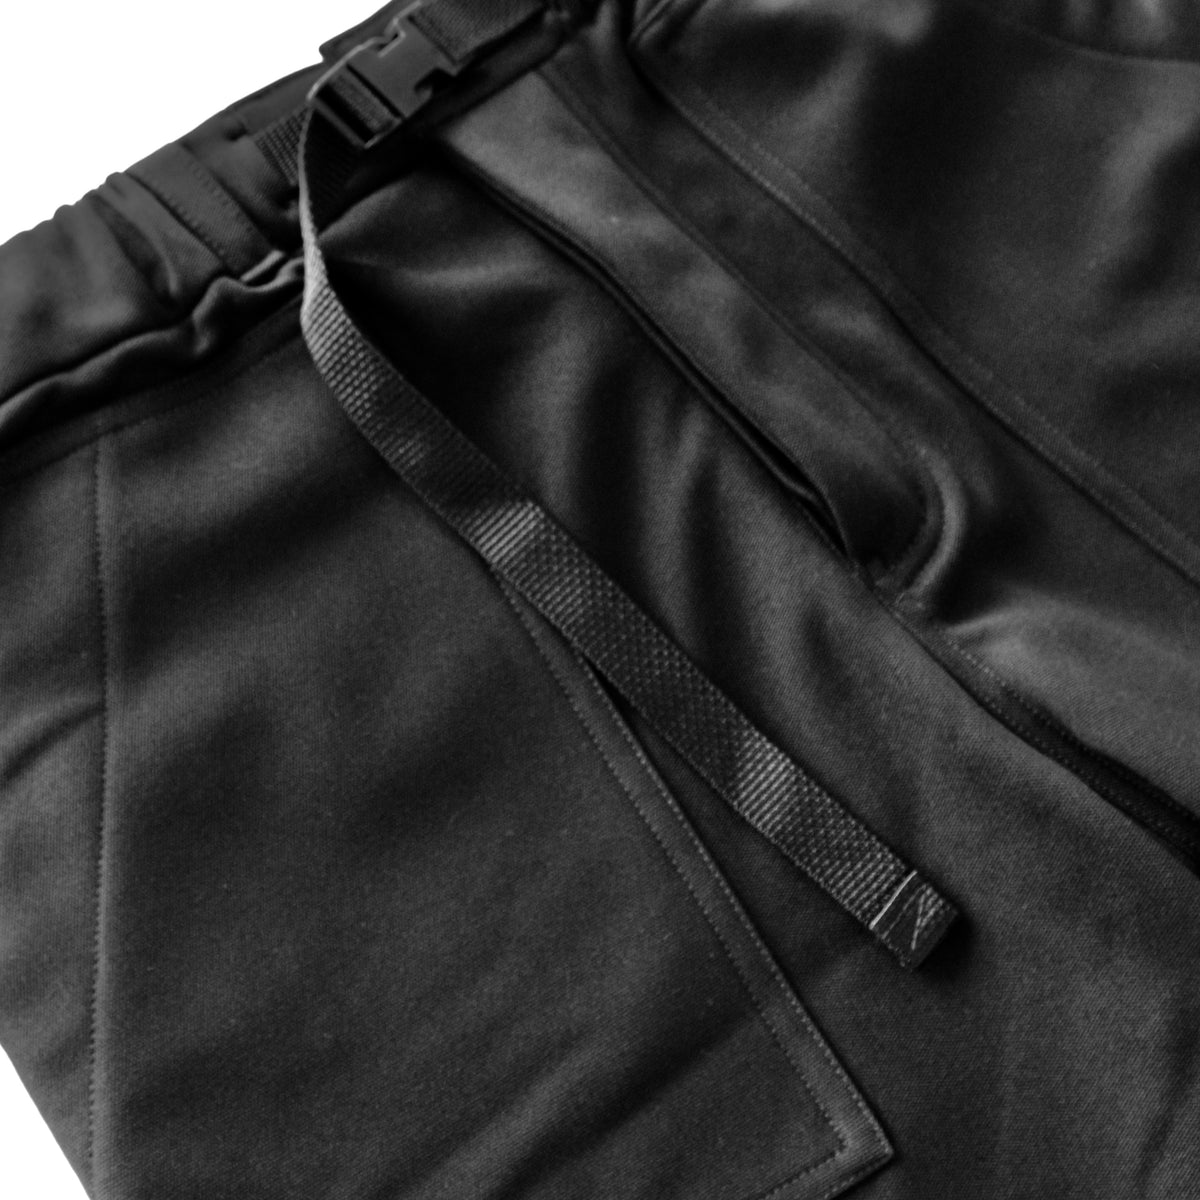 For The Homies Camp Shorts - Black